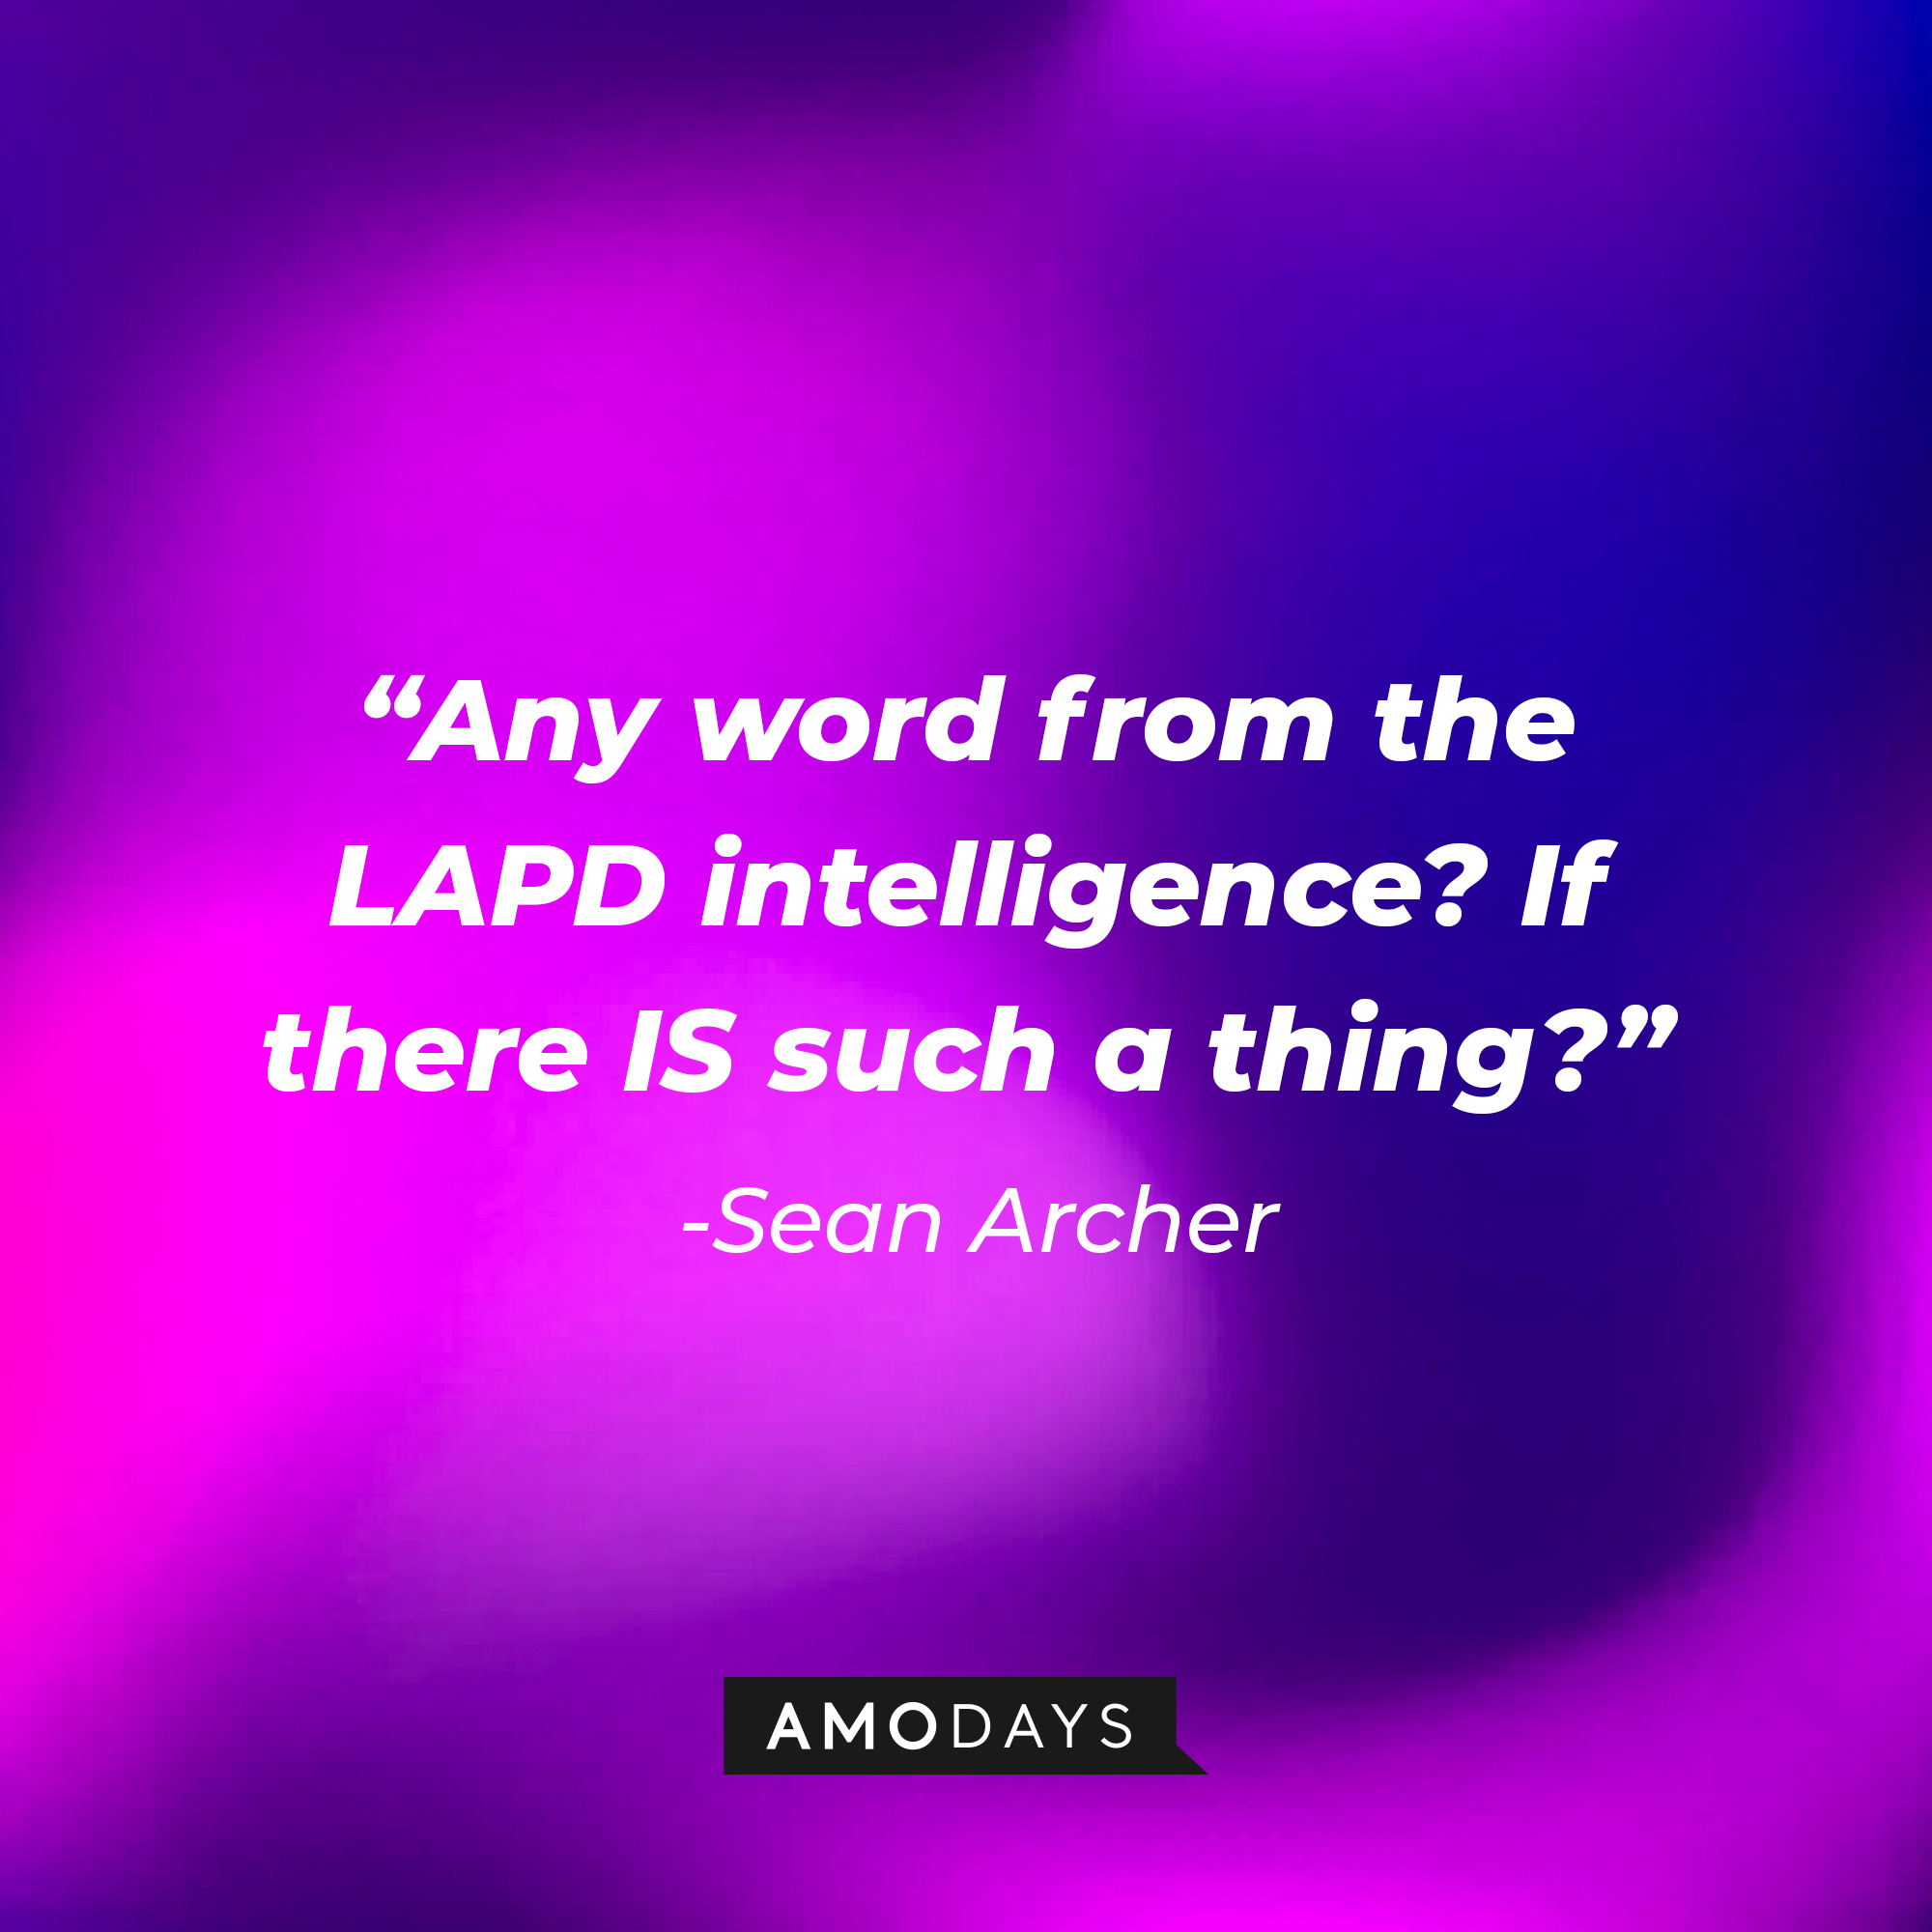 Sean Archer's quote: “Any word from the LAPD intelligence? If there IS such a thing?” : Source: Amodays